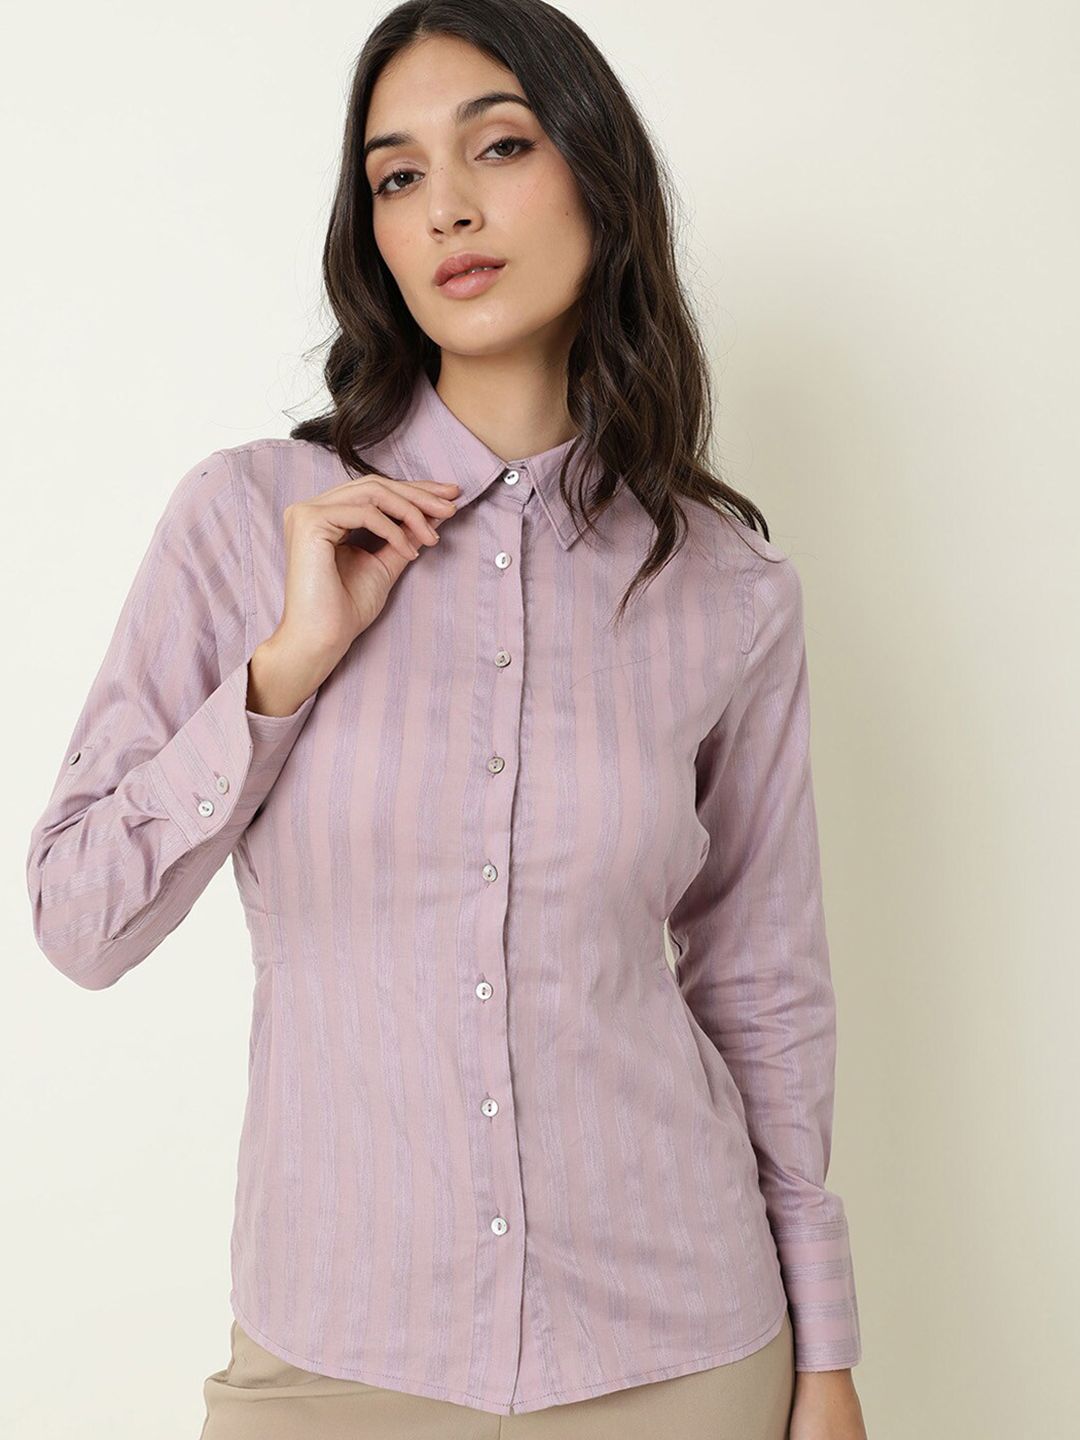 RAREISM Lavender Striped Cotton Blend Shirt Style Top Price in India